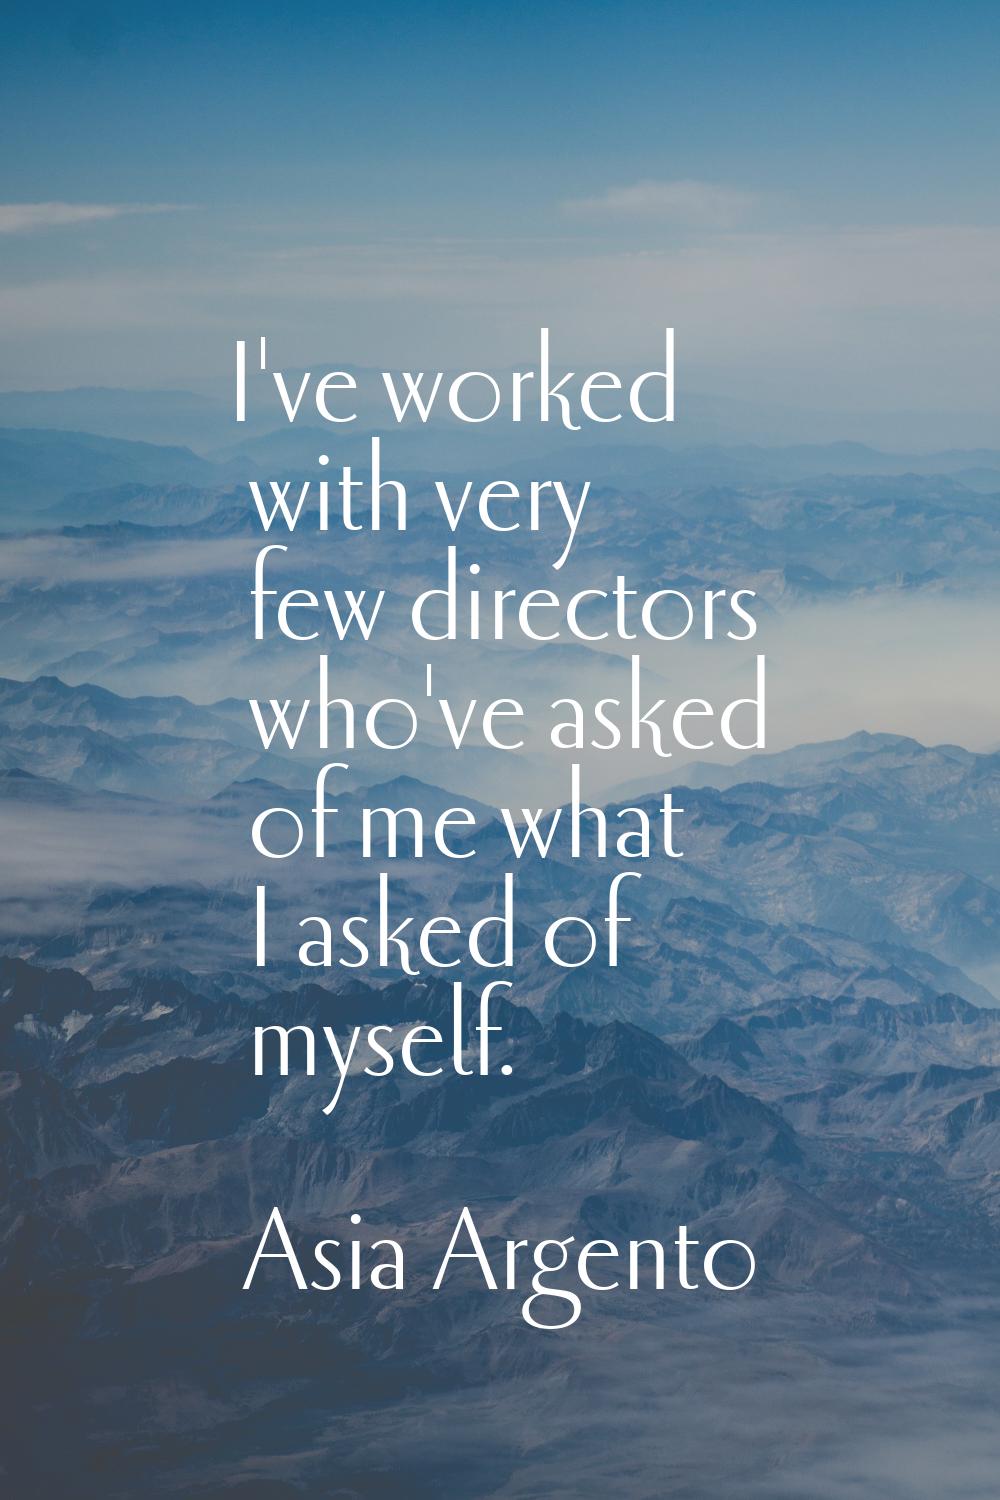 I've worked with very few directors who've asked of me what I asked of myself.